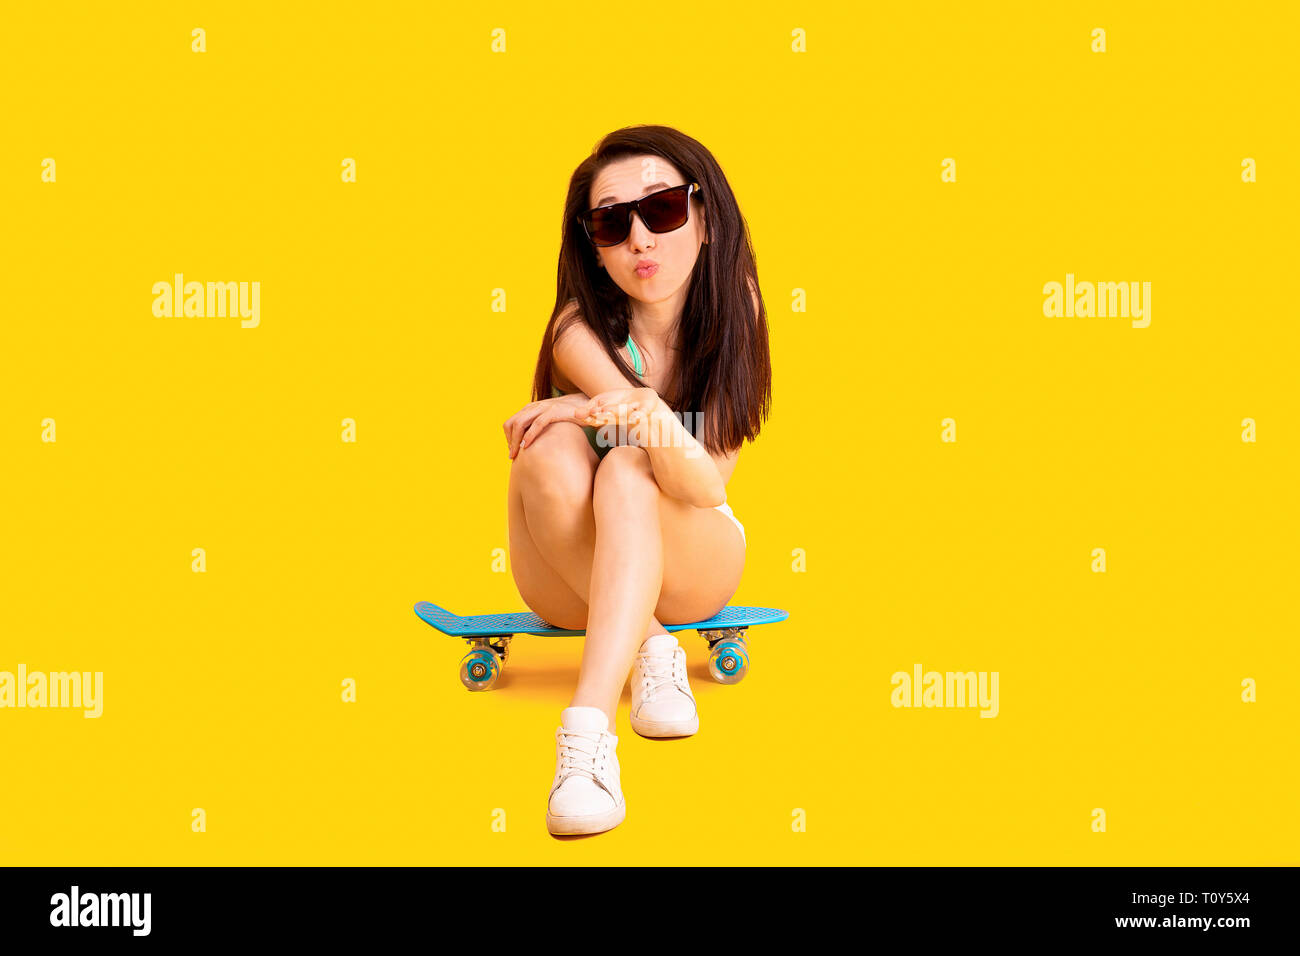 beautiful girl in sunglasses, sitting on a skateboard and sending air kiss, image on yellow background Stock Photo